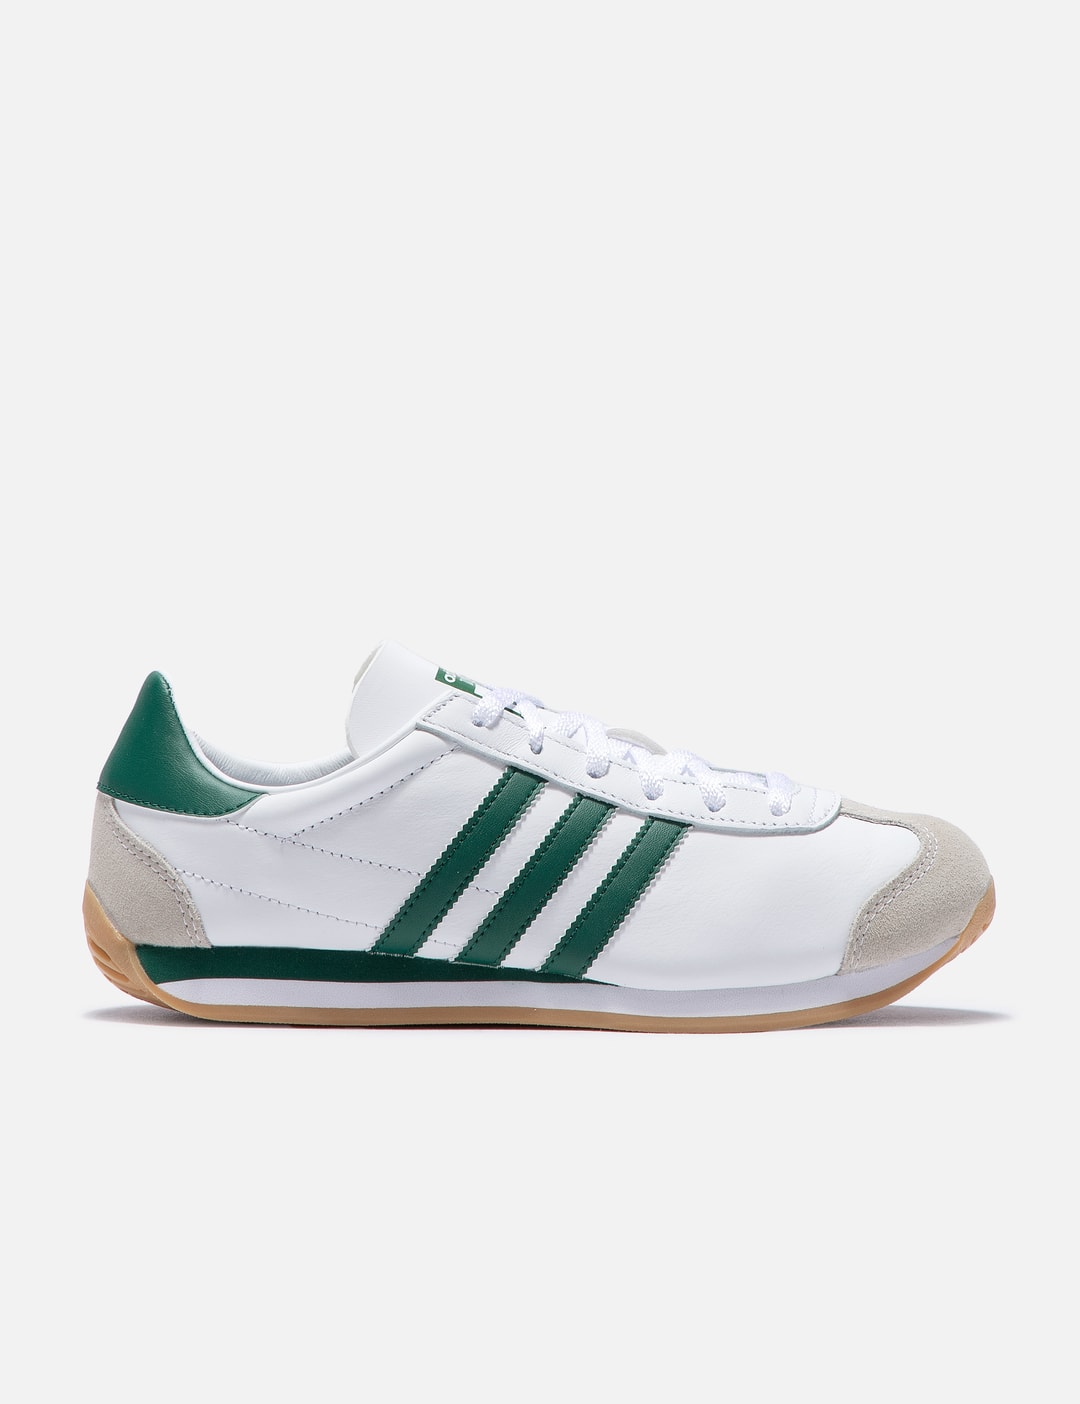 Adidas Originals - Country OG Shoes | HBX - Globally Curated Fashion ...